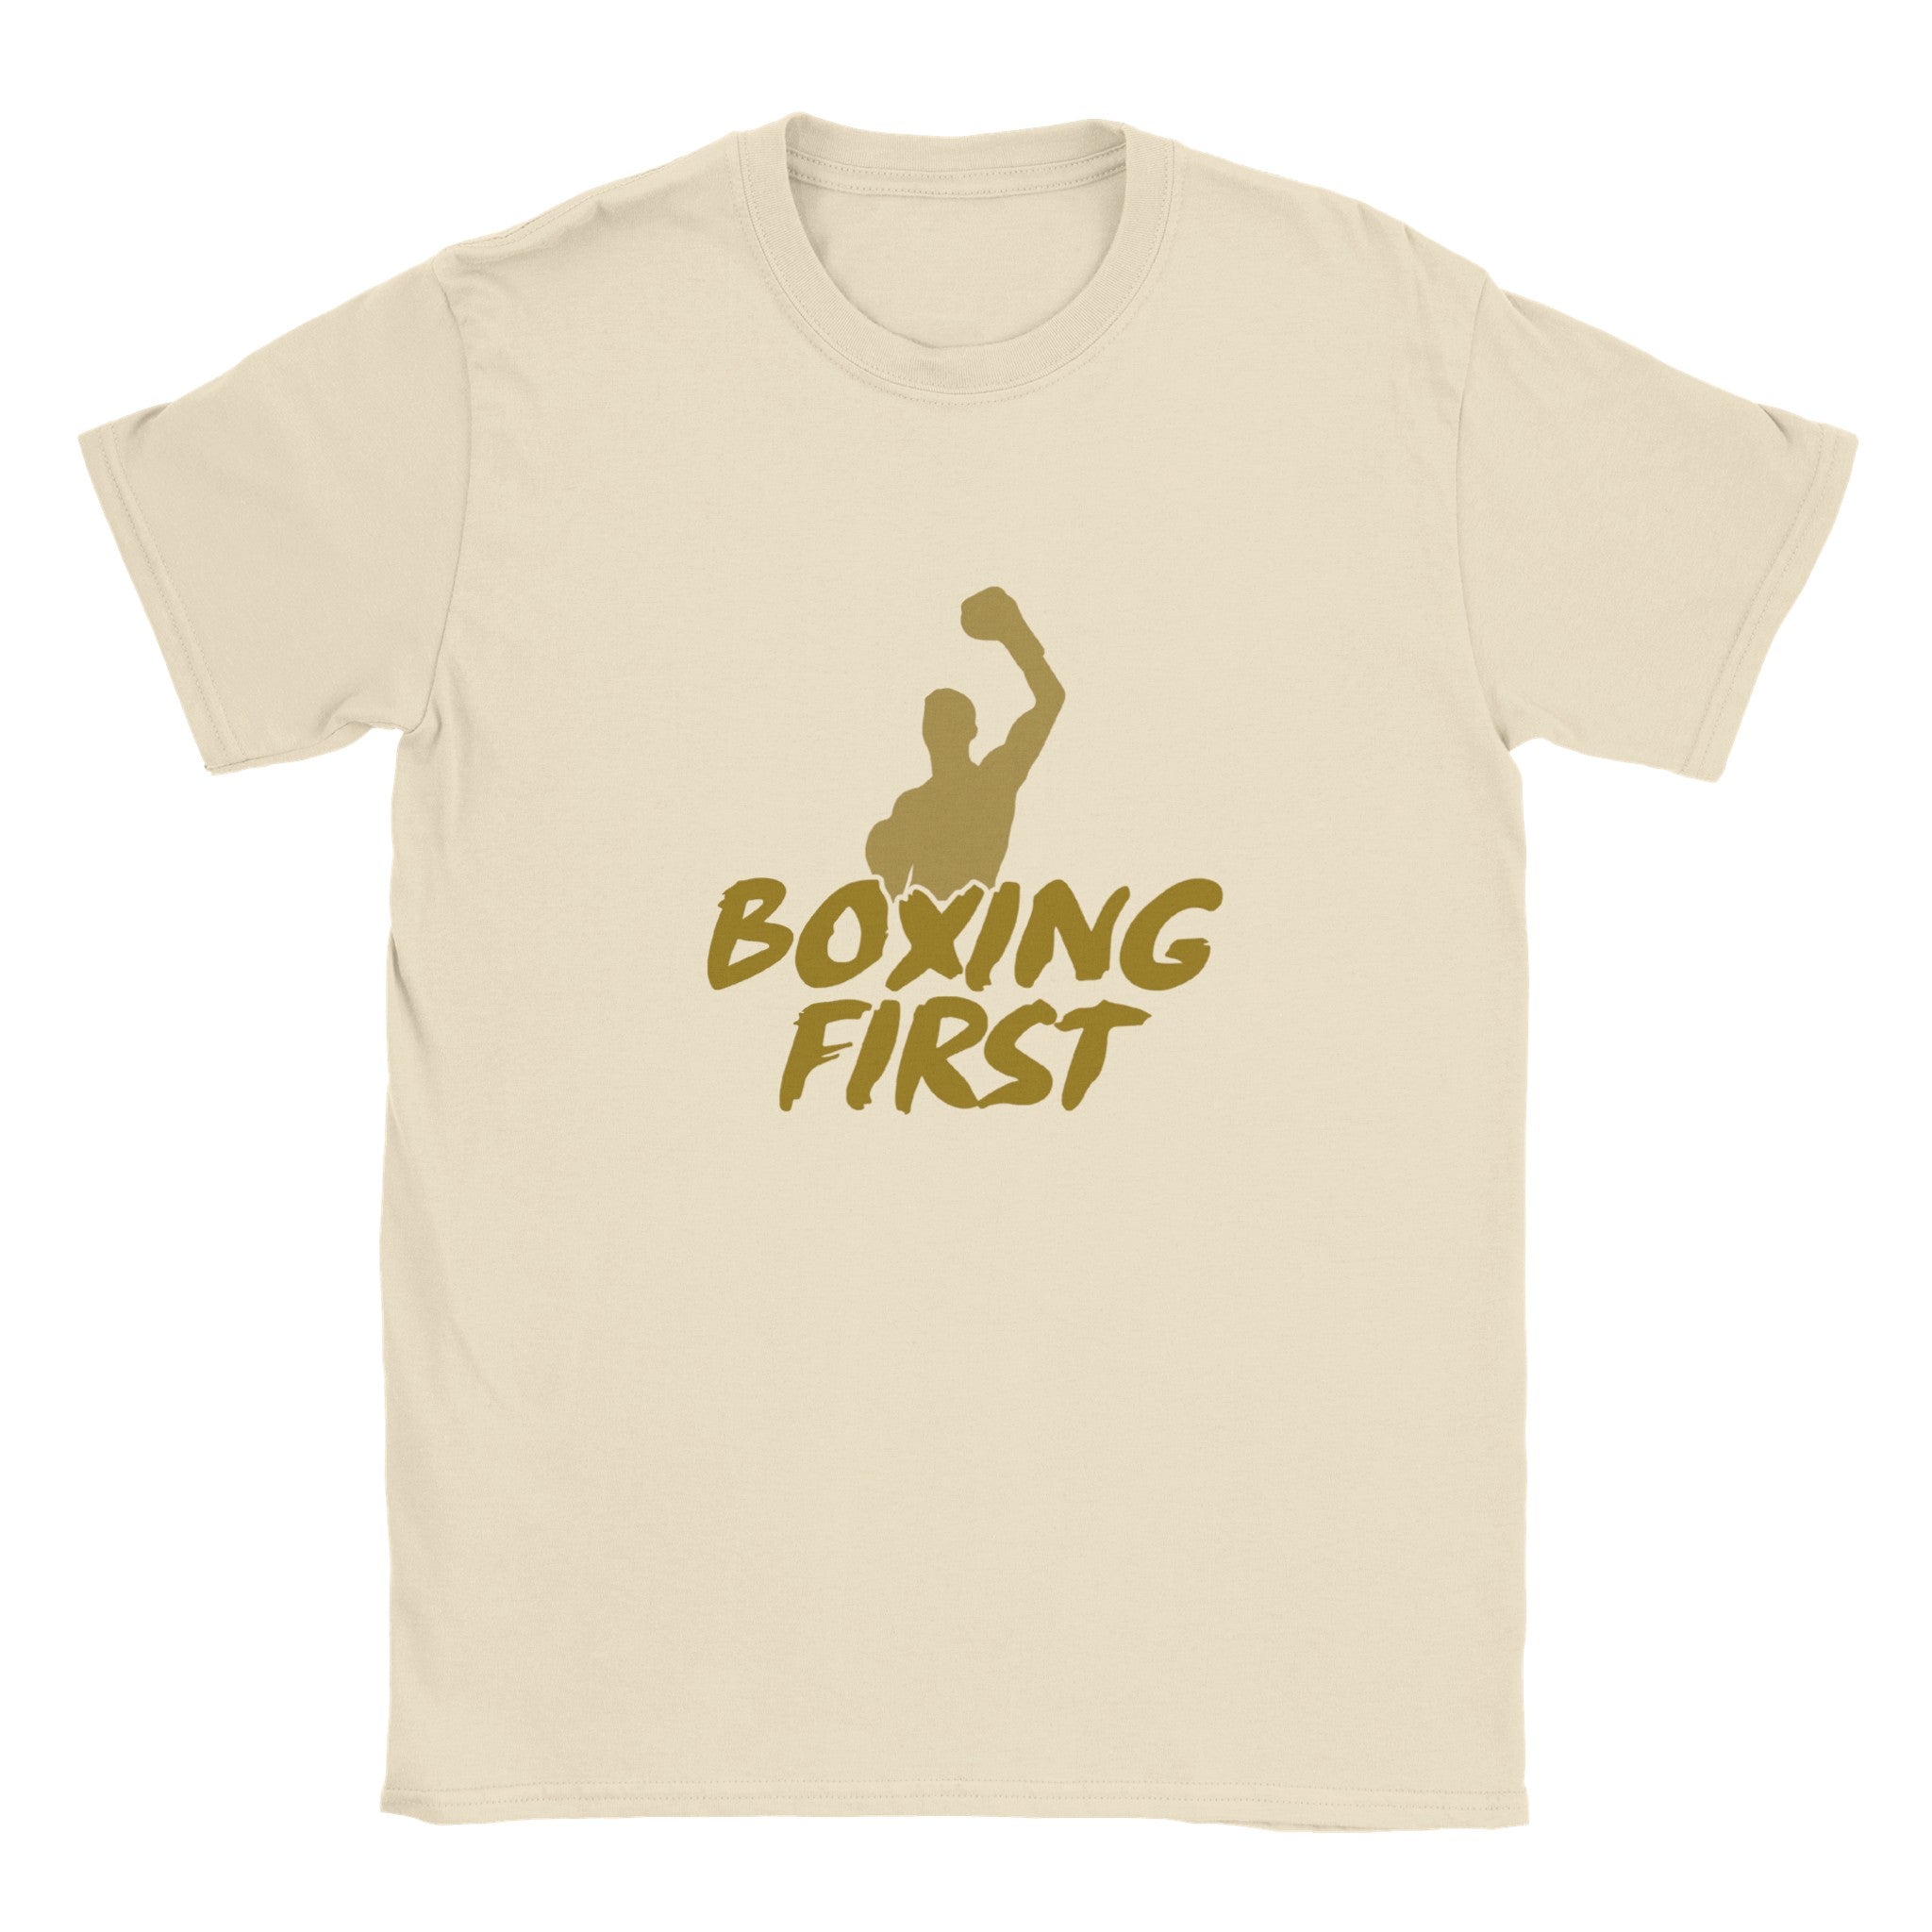 Boxing First T-shirt